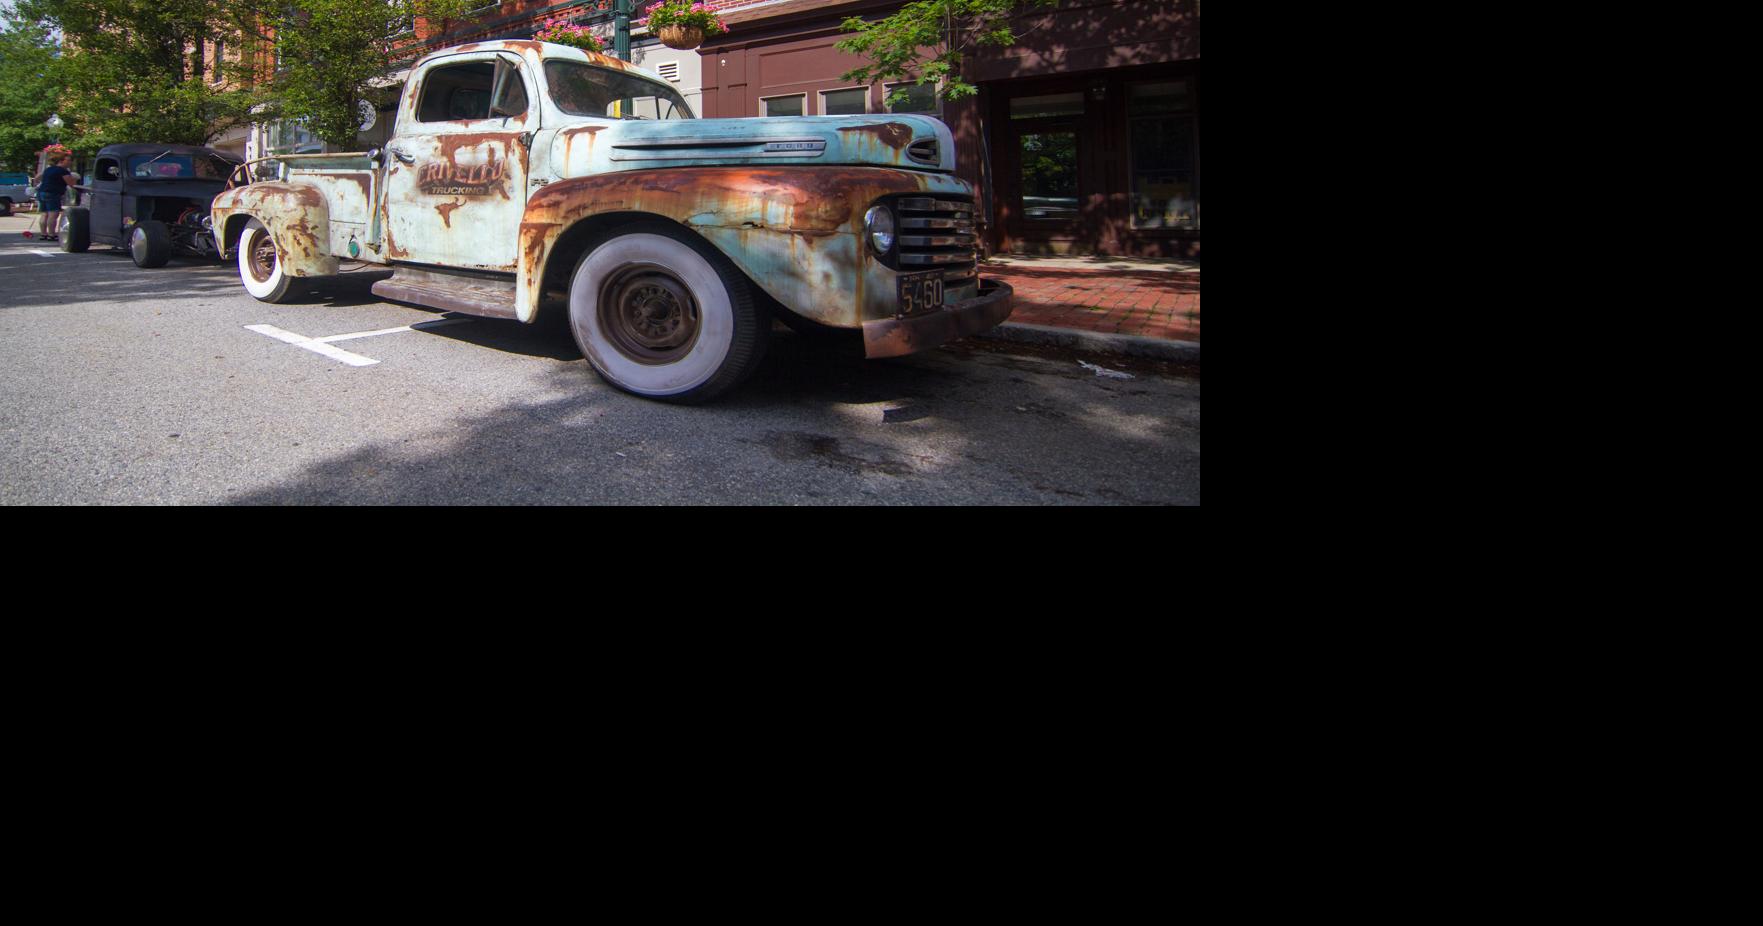 SLIDESHOW Amesbury Days Car Show and Beer & Music Walk. Featured